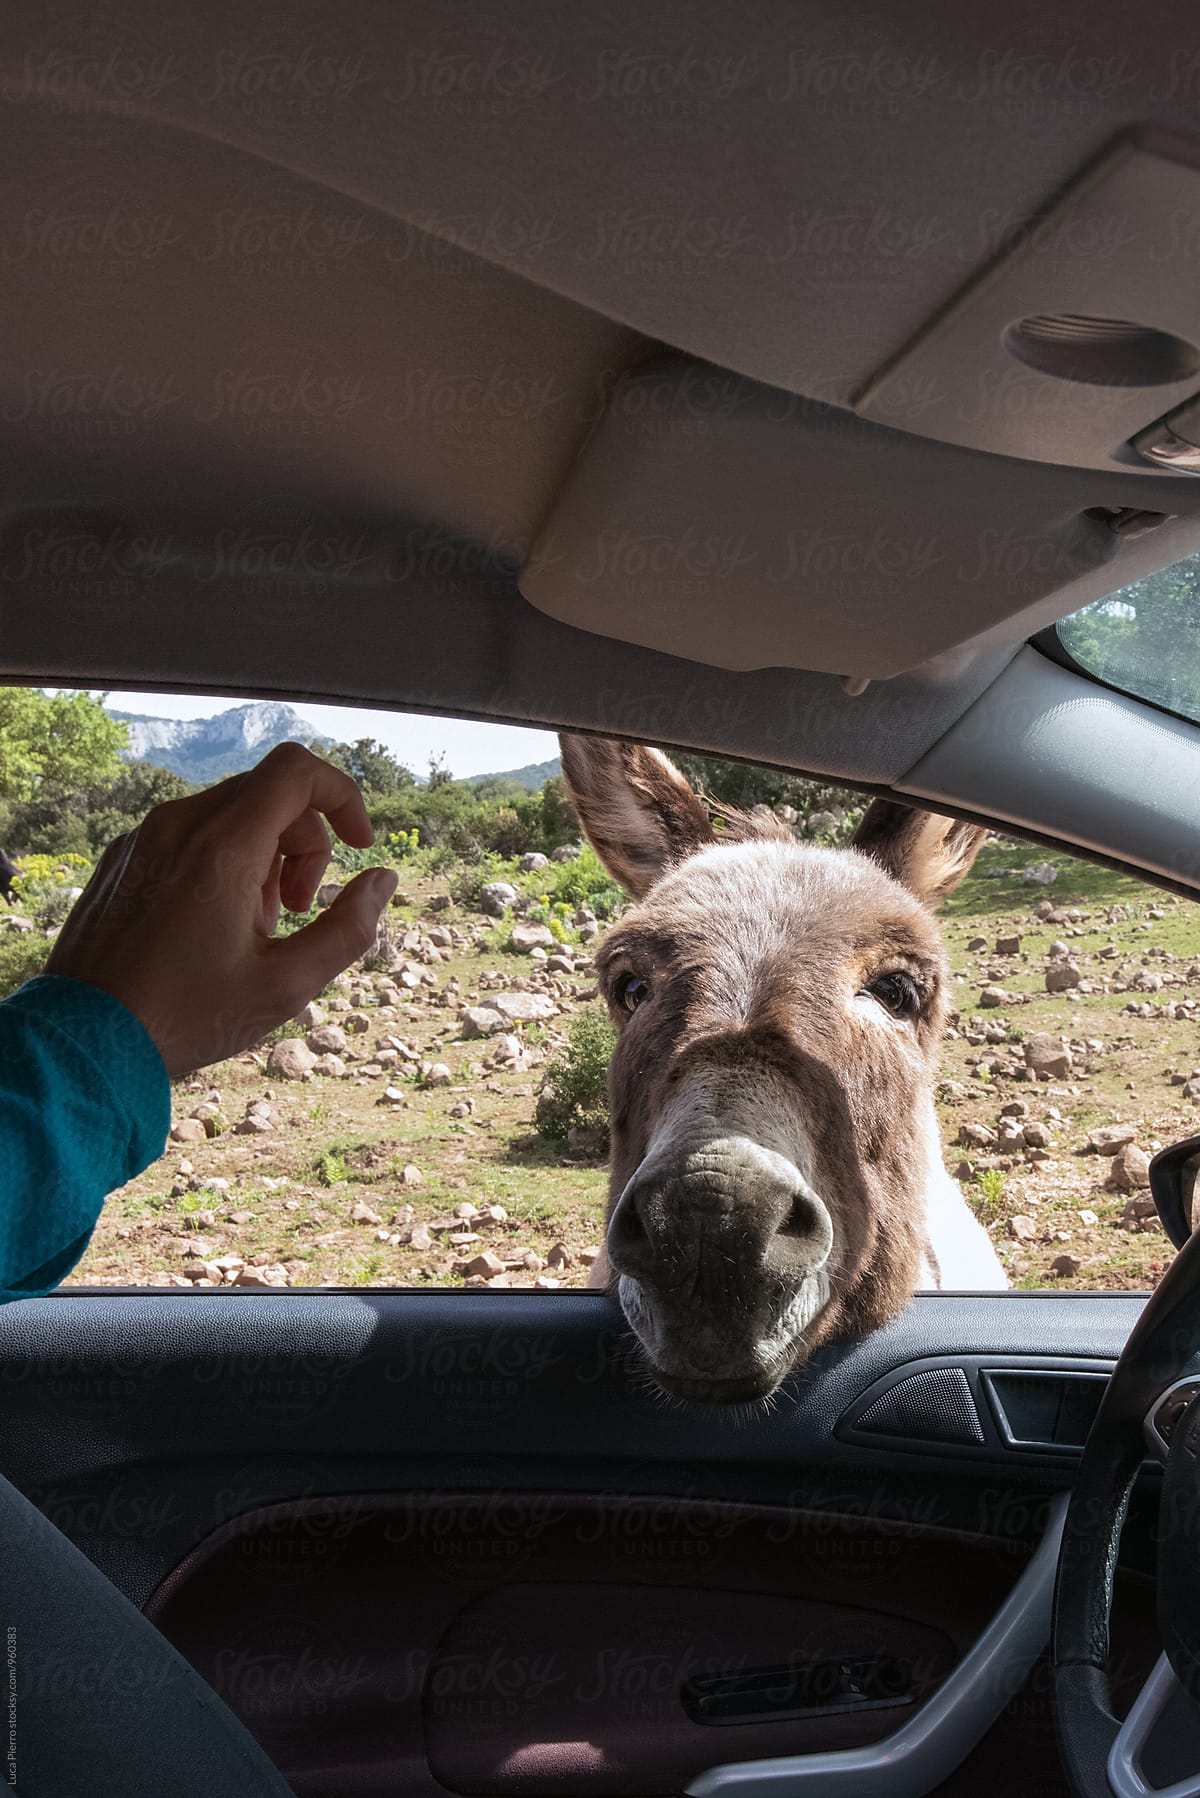 Donkey looking for food in a car